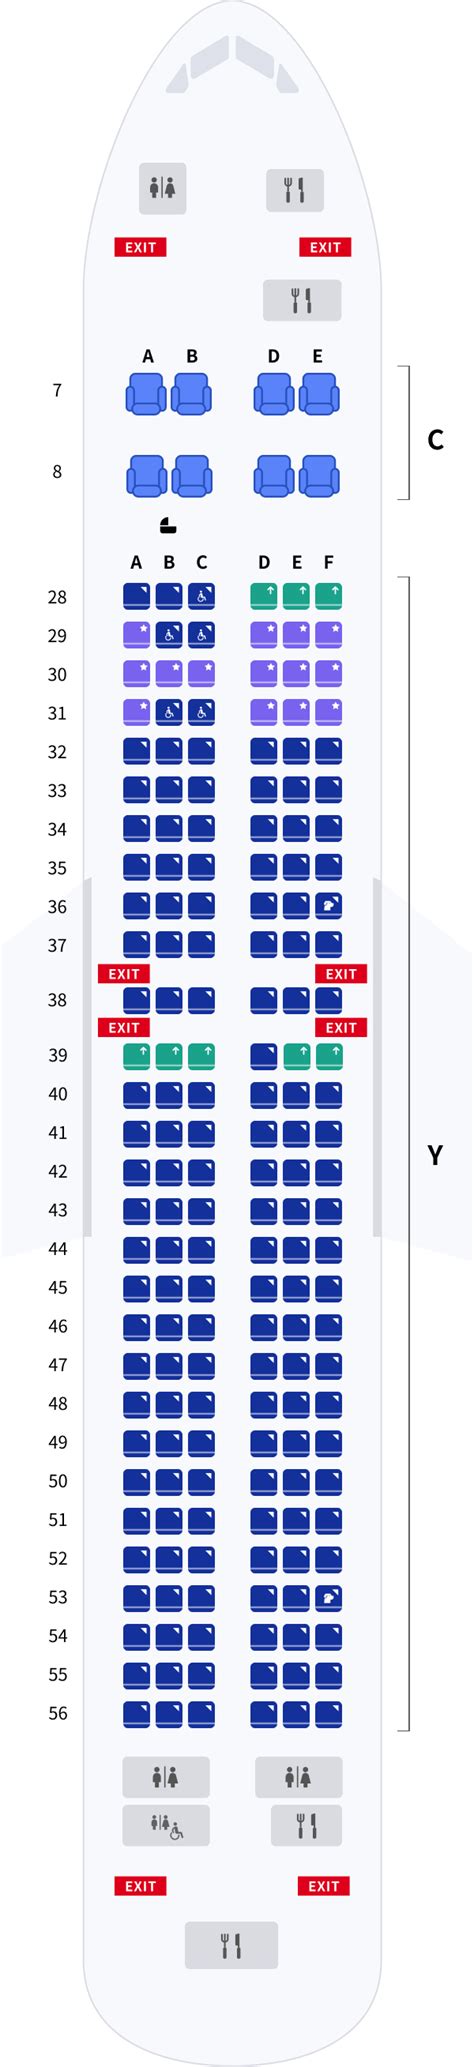 Economy. 28. 17. 126 standard seats. AC Power. Food. For your next CEBU Pacific Air flight, use this seating chart to get the most comfortable seats, legroom, and recline on .. 